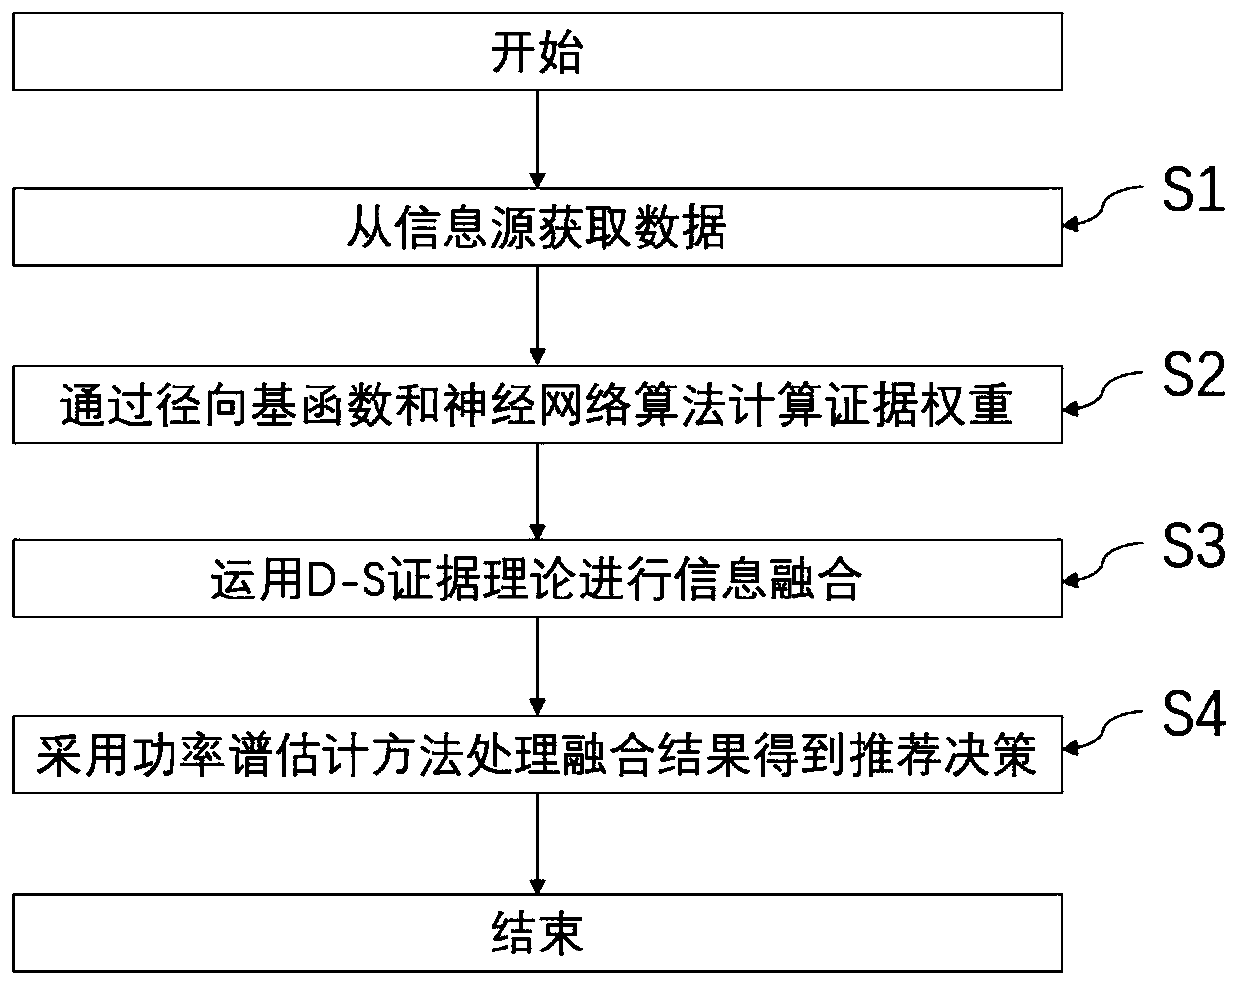 Mobile e-commerce recommendation method and system based on multi-source information fusion